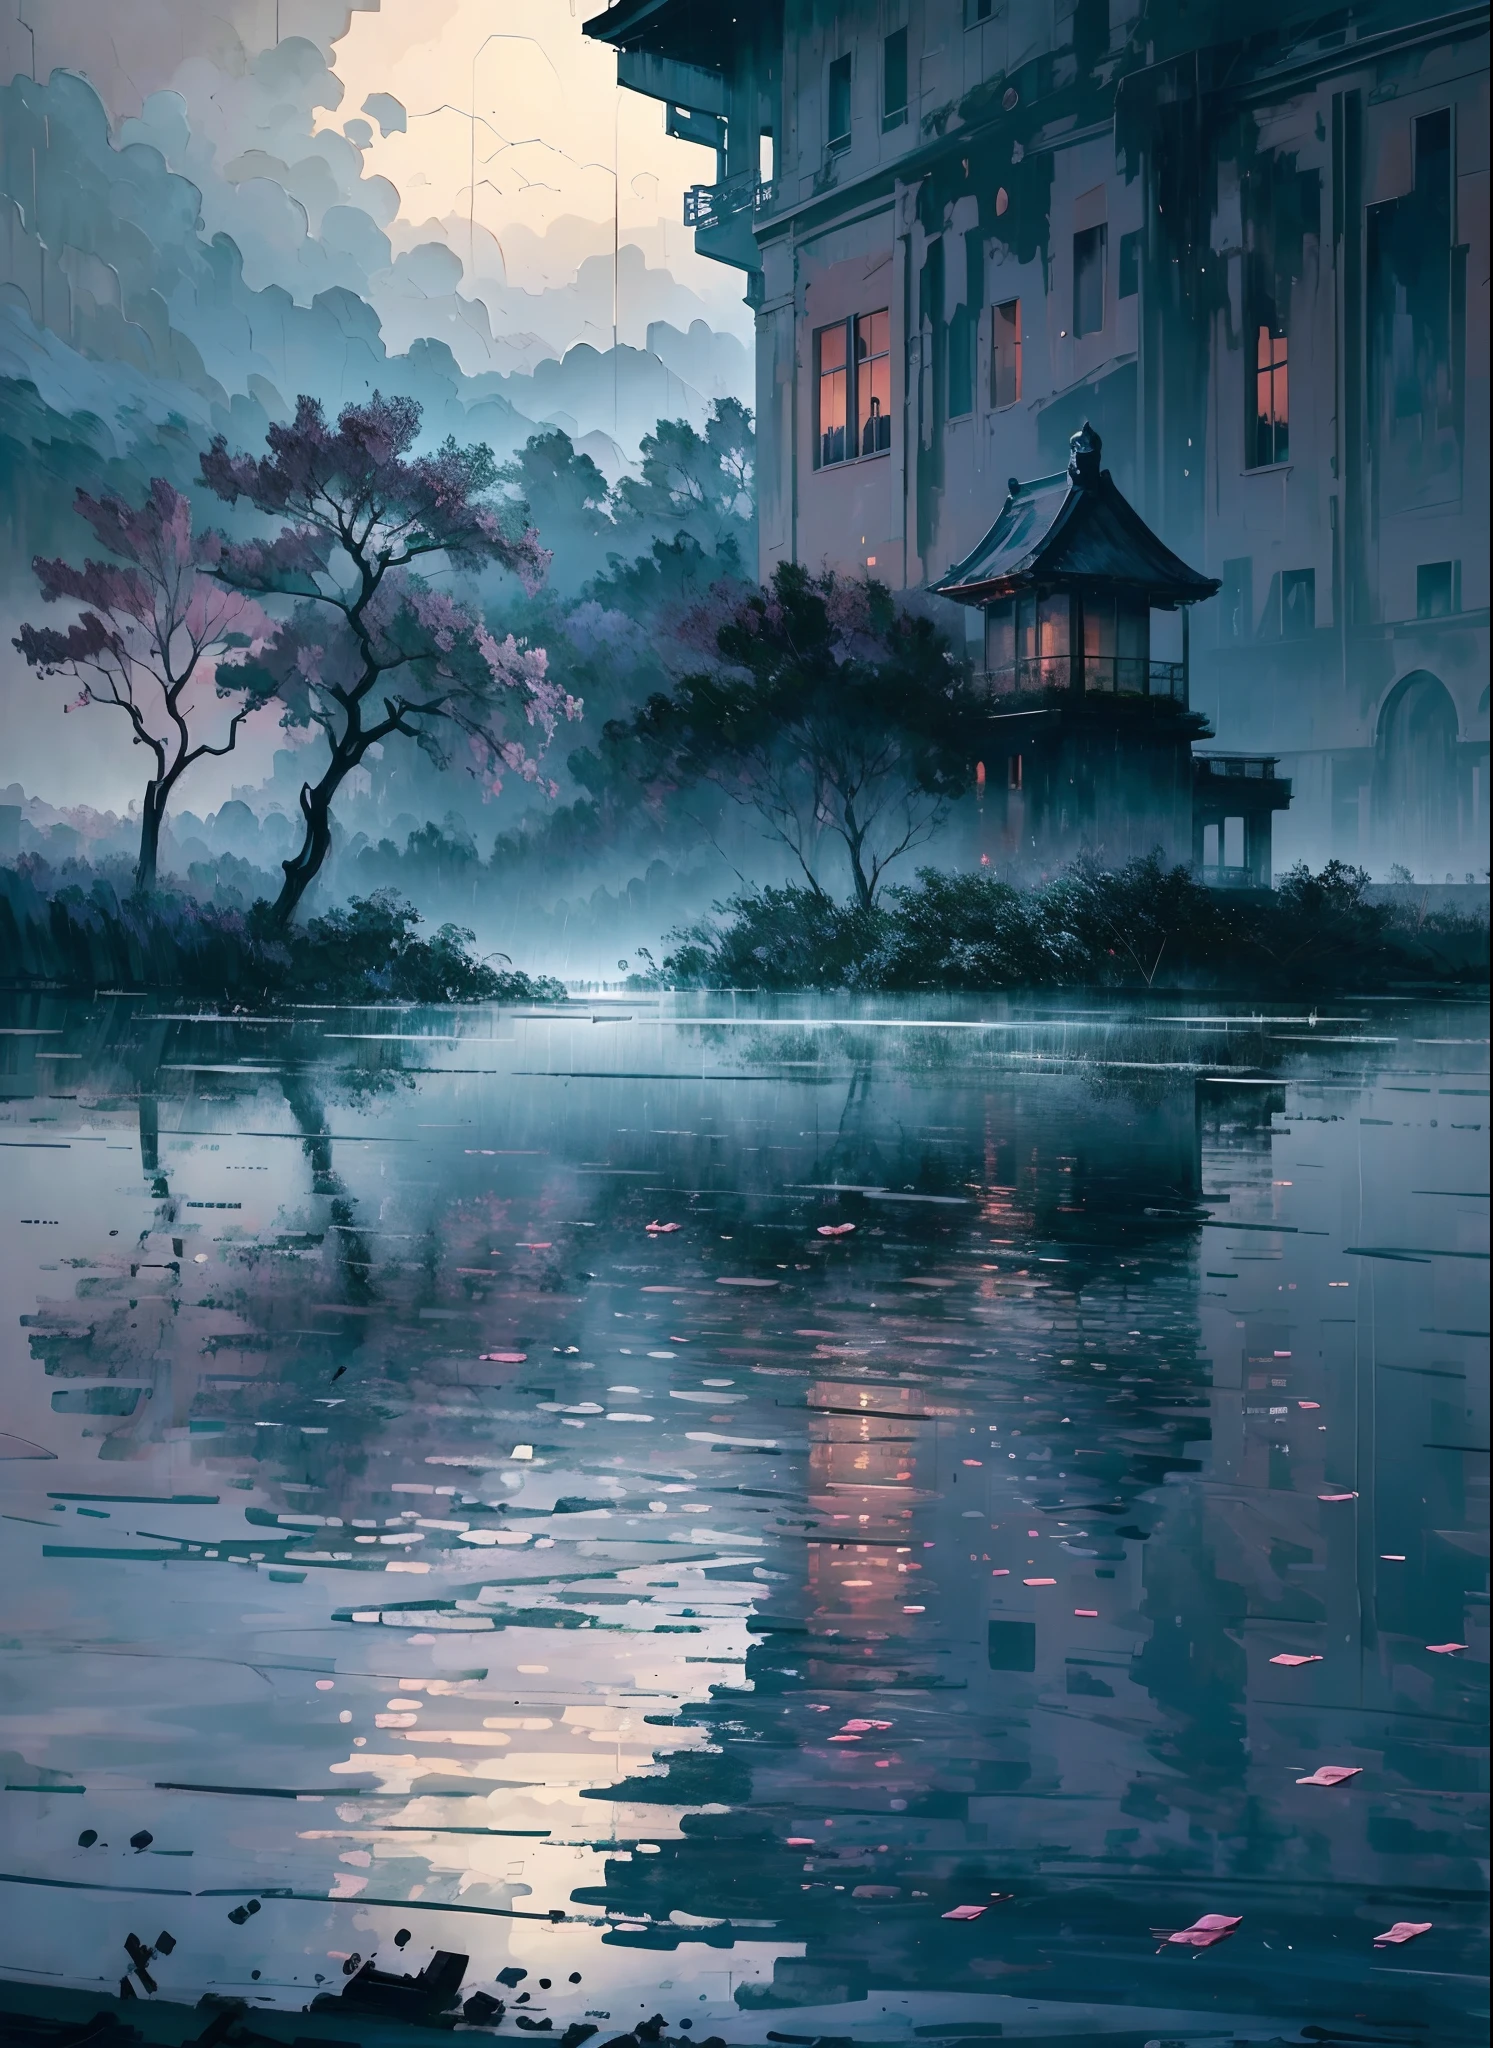 Best quality,4K,8K,A high resolution,Masterpiece:1.2,Ultra-detailed,Realistic,Photorealistic:1.37,landscape,Monet,Impresionismo,flood,illuminations,Japan culture,disaster,heavy rain,Dark clouds,Gloomy atmosphere,Flooded rivers,damaged buildings,Desolate streets,Soaked landscape,Ripple water reflection,Waterlogged trees,Moody lighting,Brush Strokes,A peaceful garden with cherry blossoms,Sparse cherry petals,floating debris,Turbulent waves,ominous storm clouds,Subtle color palette,Soft lighting,Sinister emotions,Crumbling building,Abandoned temple,Unforgettable scenery,A mysterious mist shrouded the scene,Ominous silence,Breathtaking but melancholic scene,The juxtaposition of natural beauty and destruction,The  figure stood in the chaos,Think about the power of nature,A charming blend of tranquility and chaos,Visually striking and emotionally evocative artwork,Showcasing the delicate balance between man and nature,Convey a feeling of wonder and awe.